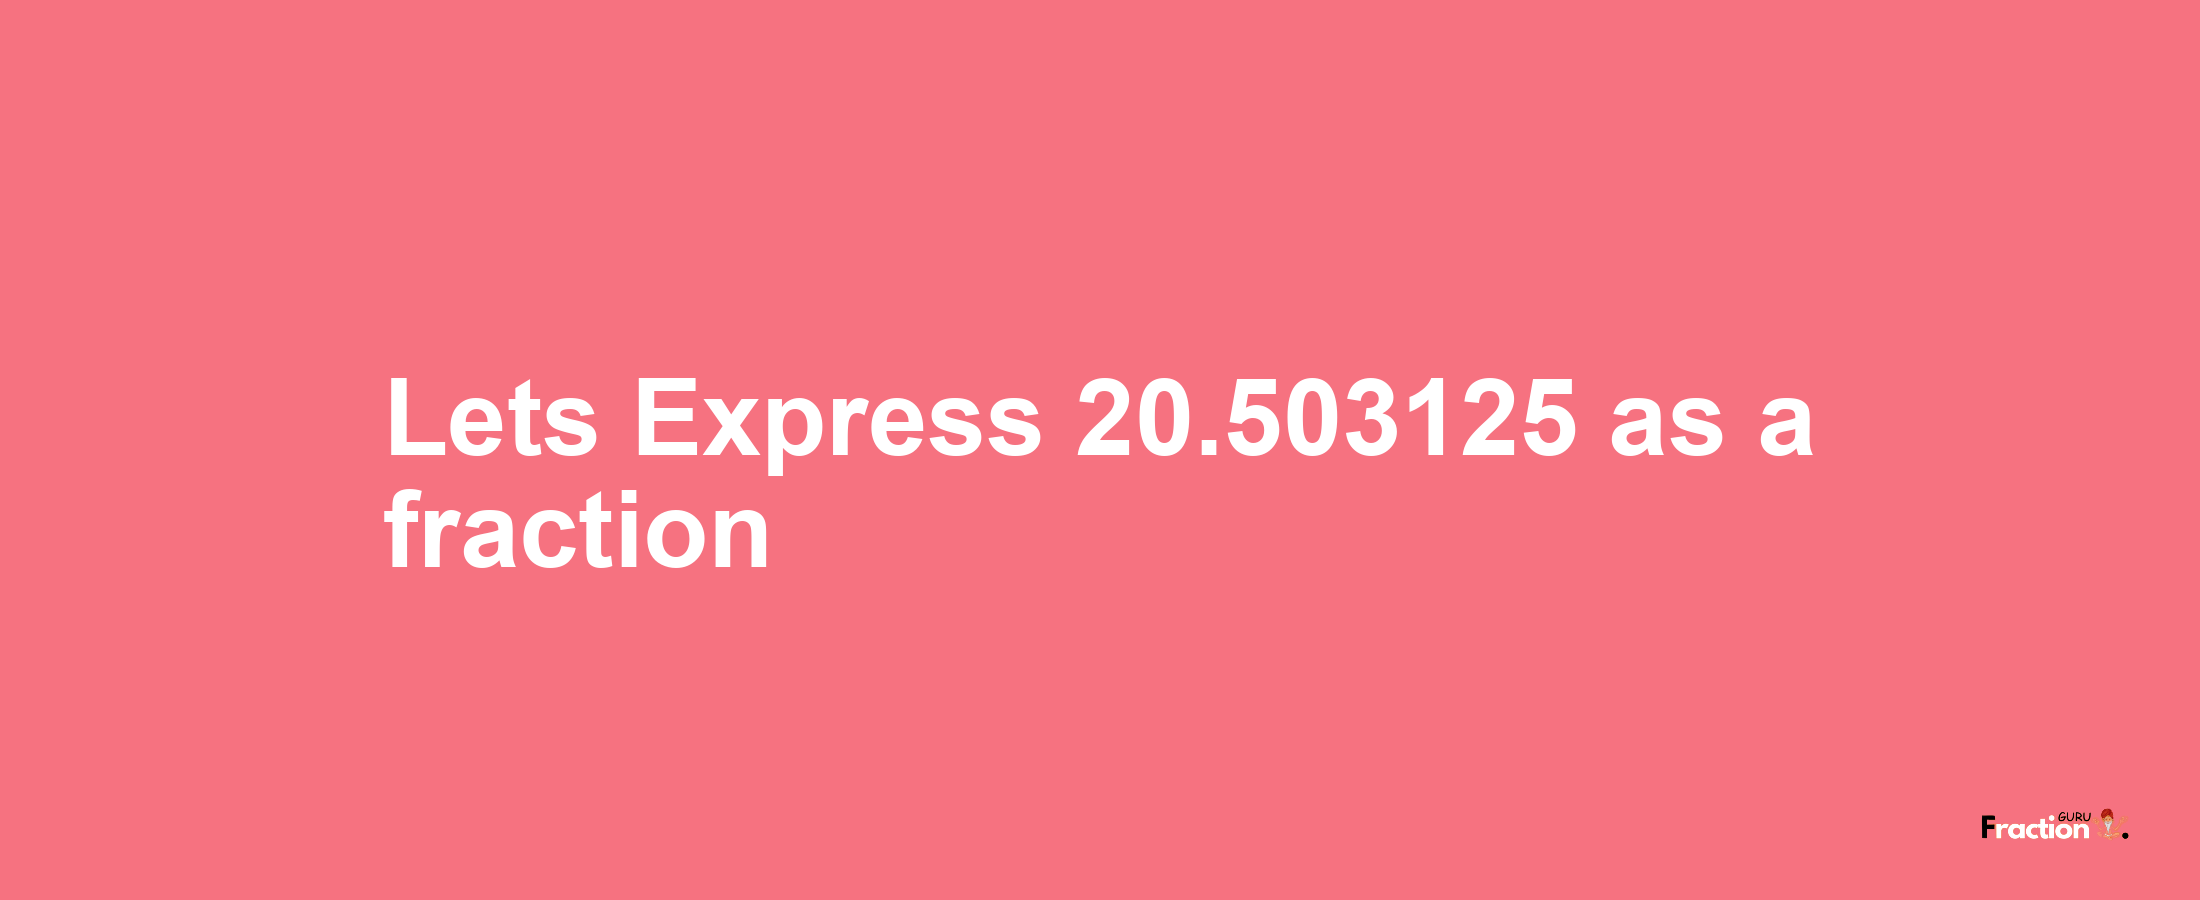 Lets Express 20.503125 as afraction